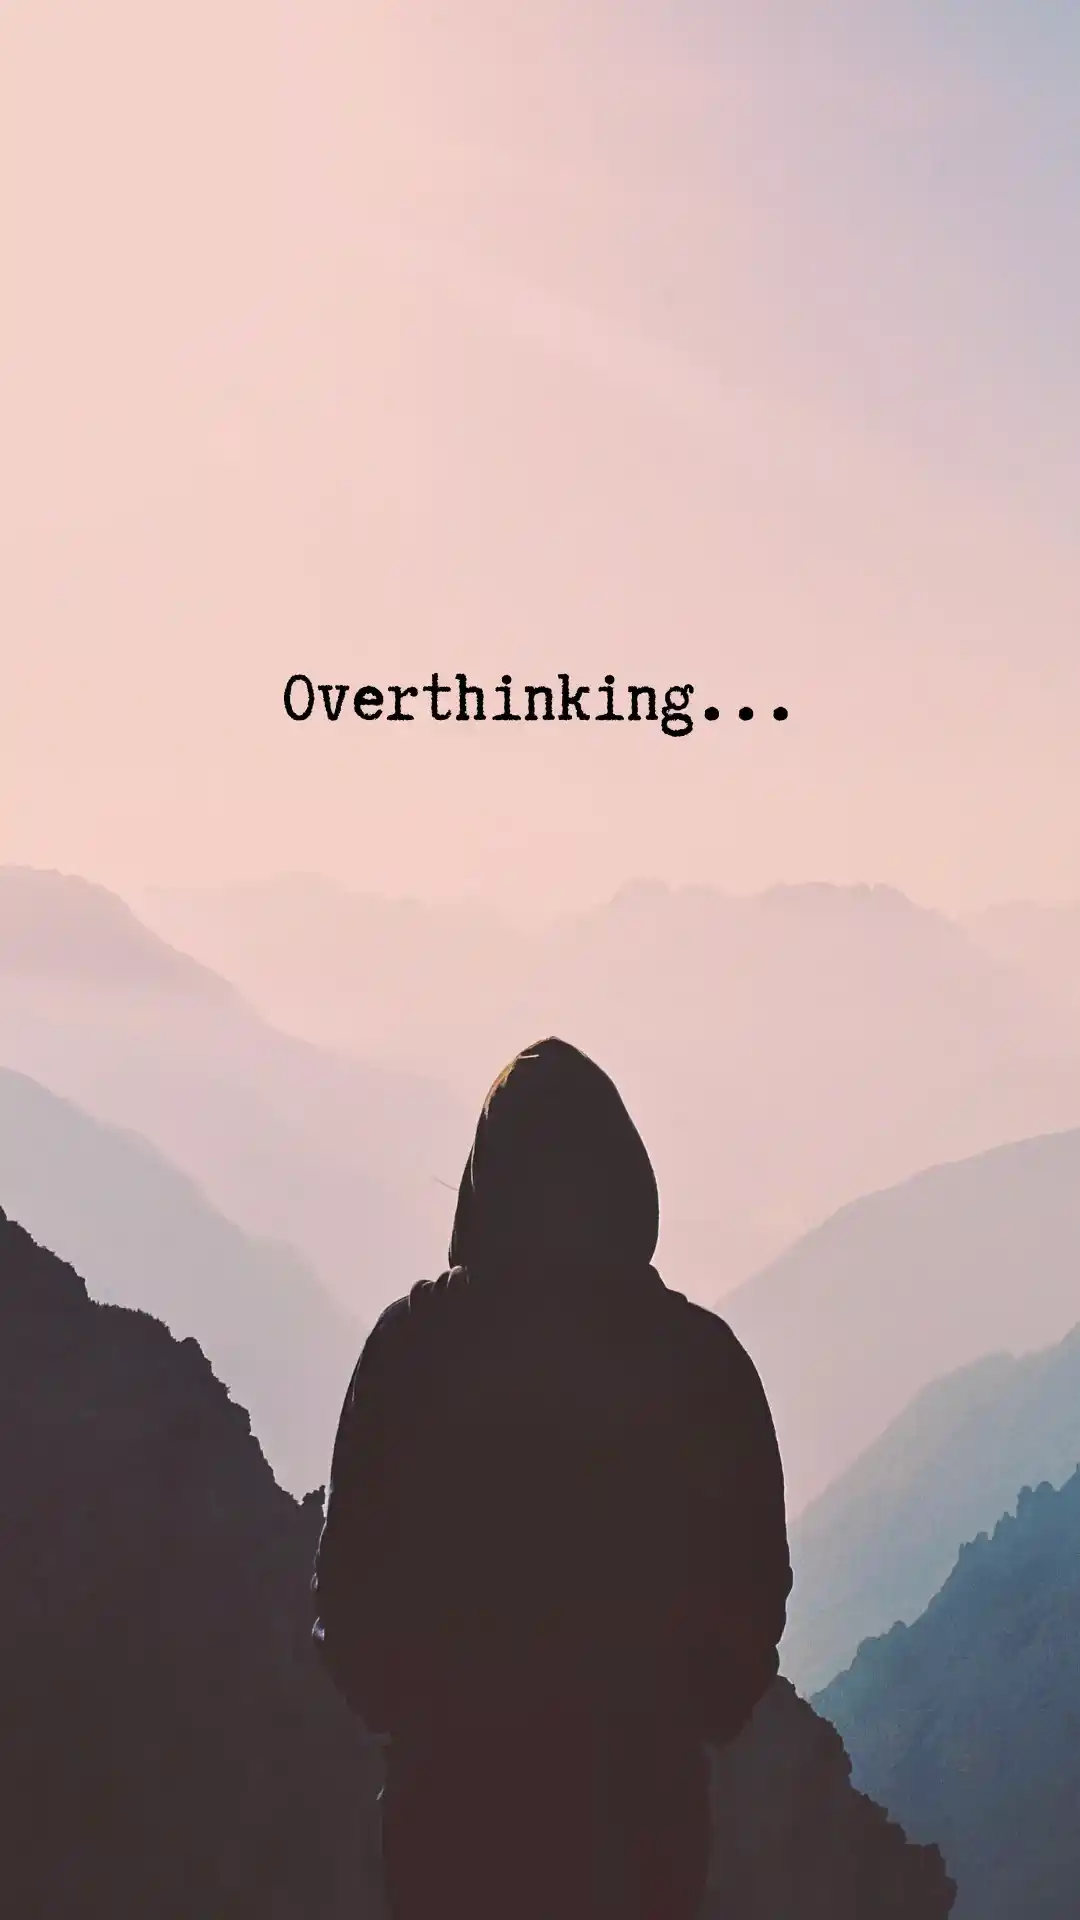 overthinking sad quote wallpaper free download for mobile